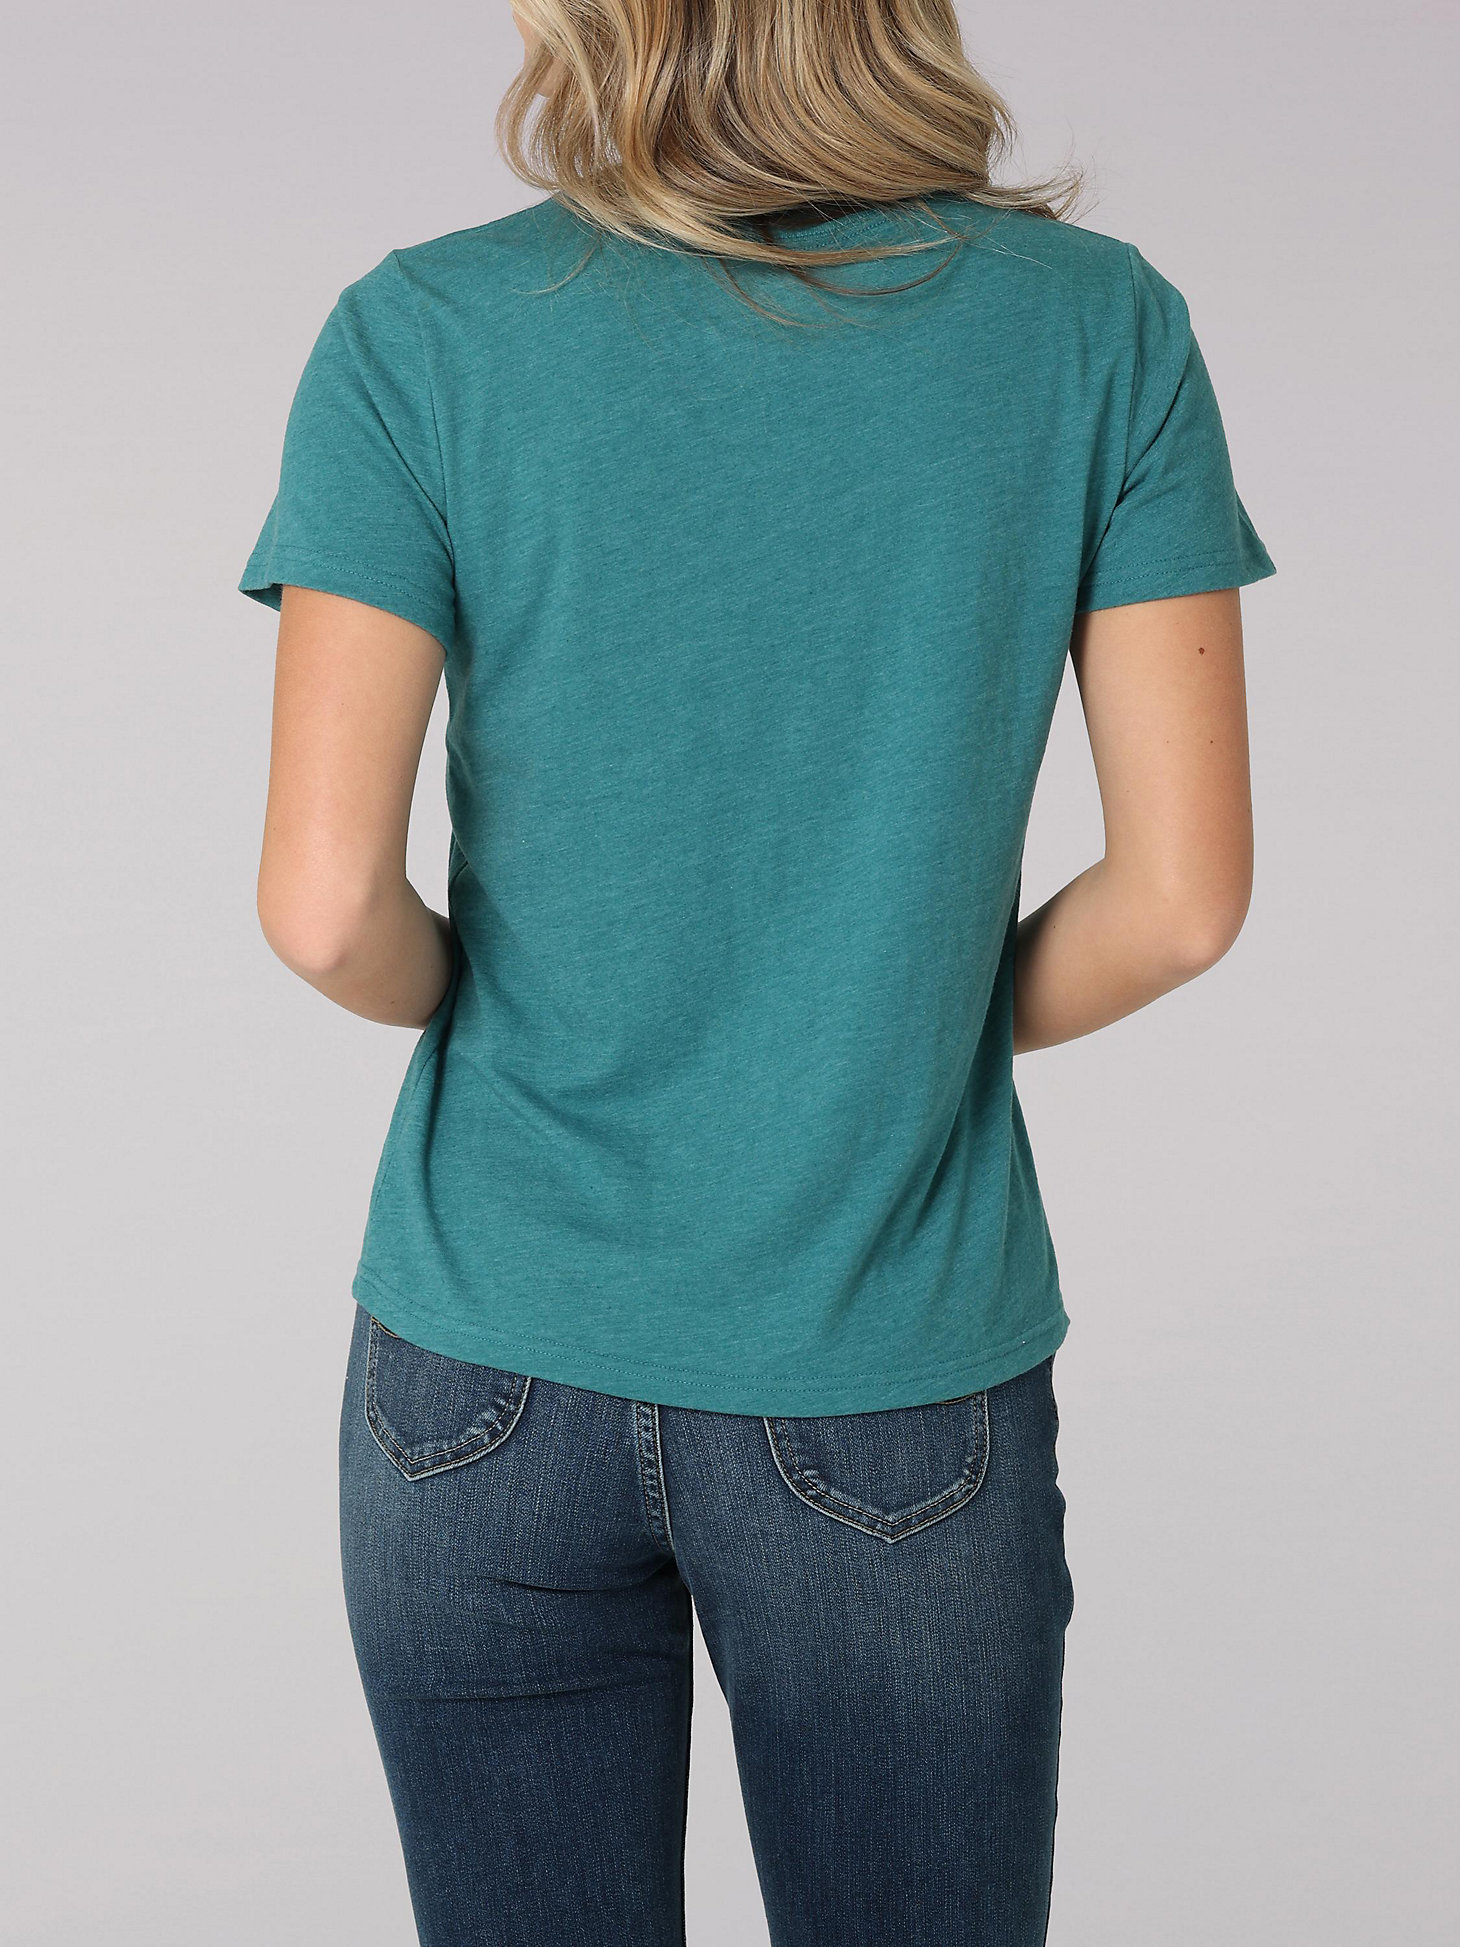 Women's Lee Lady Graphic Tee in Midway Teal Heather alternative view 1